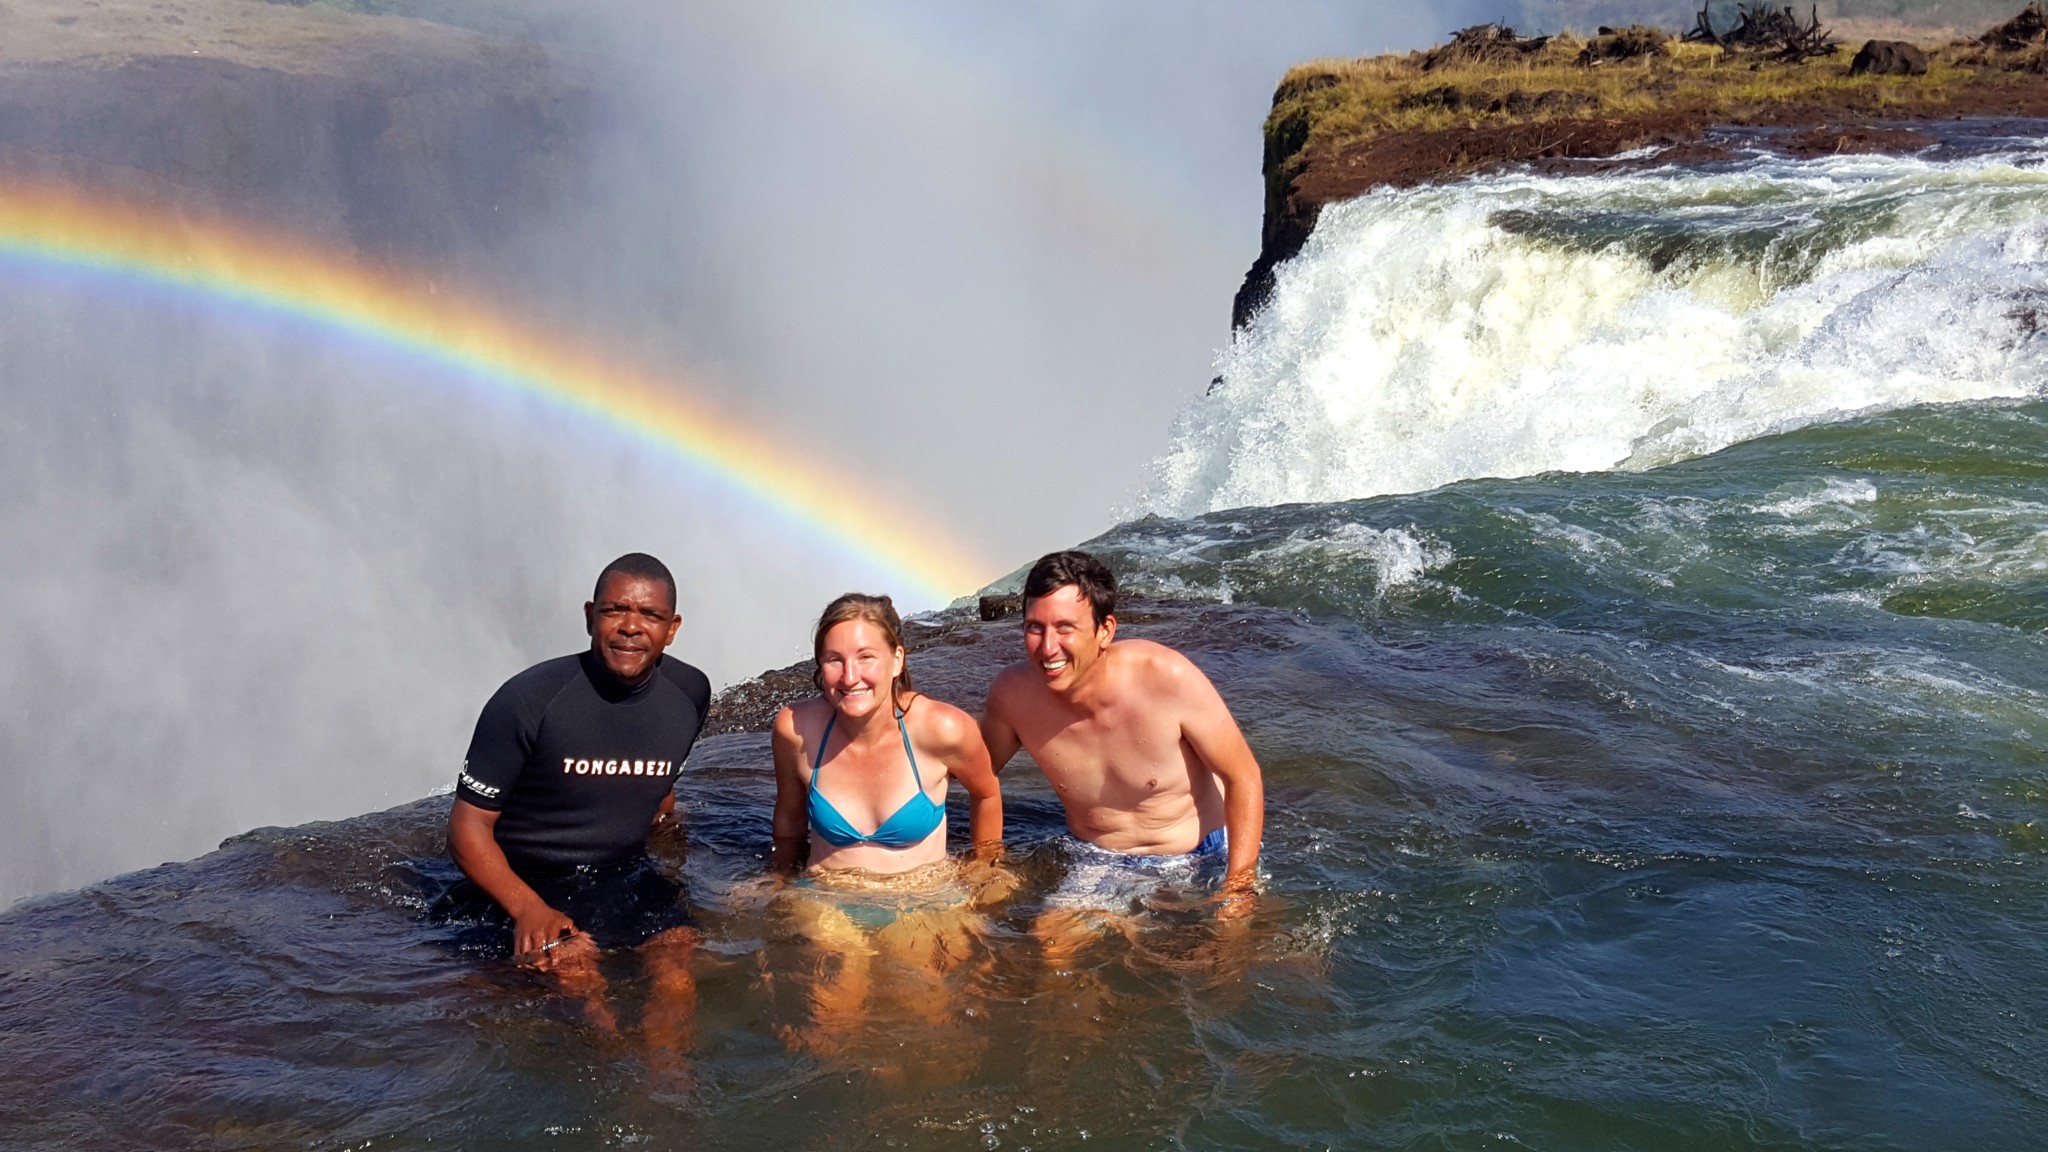 So much more to Victoria Falls than the actual falls